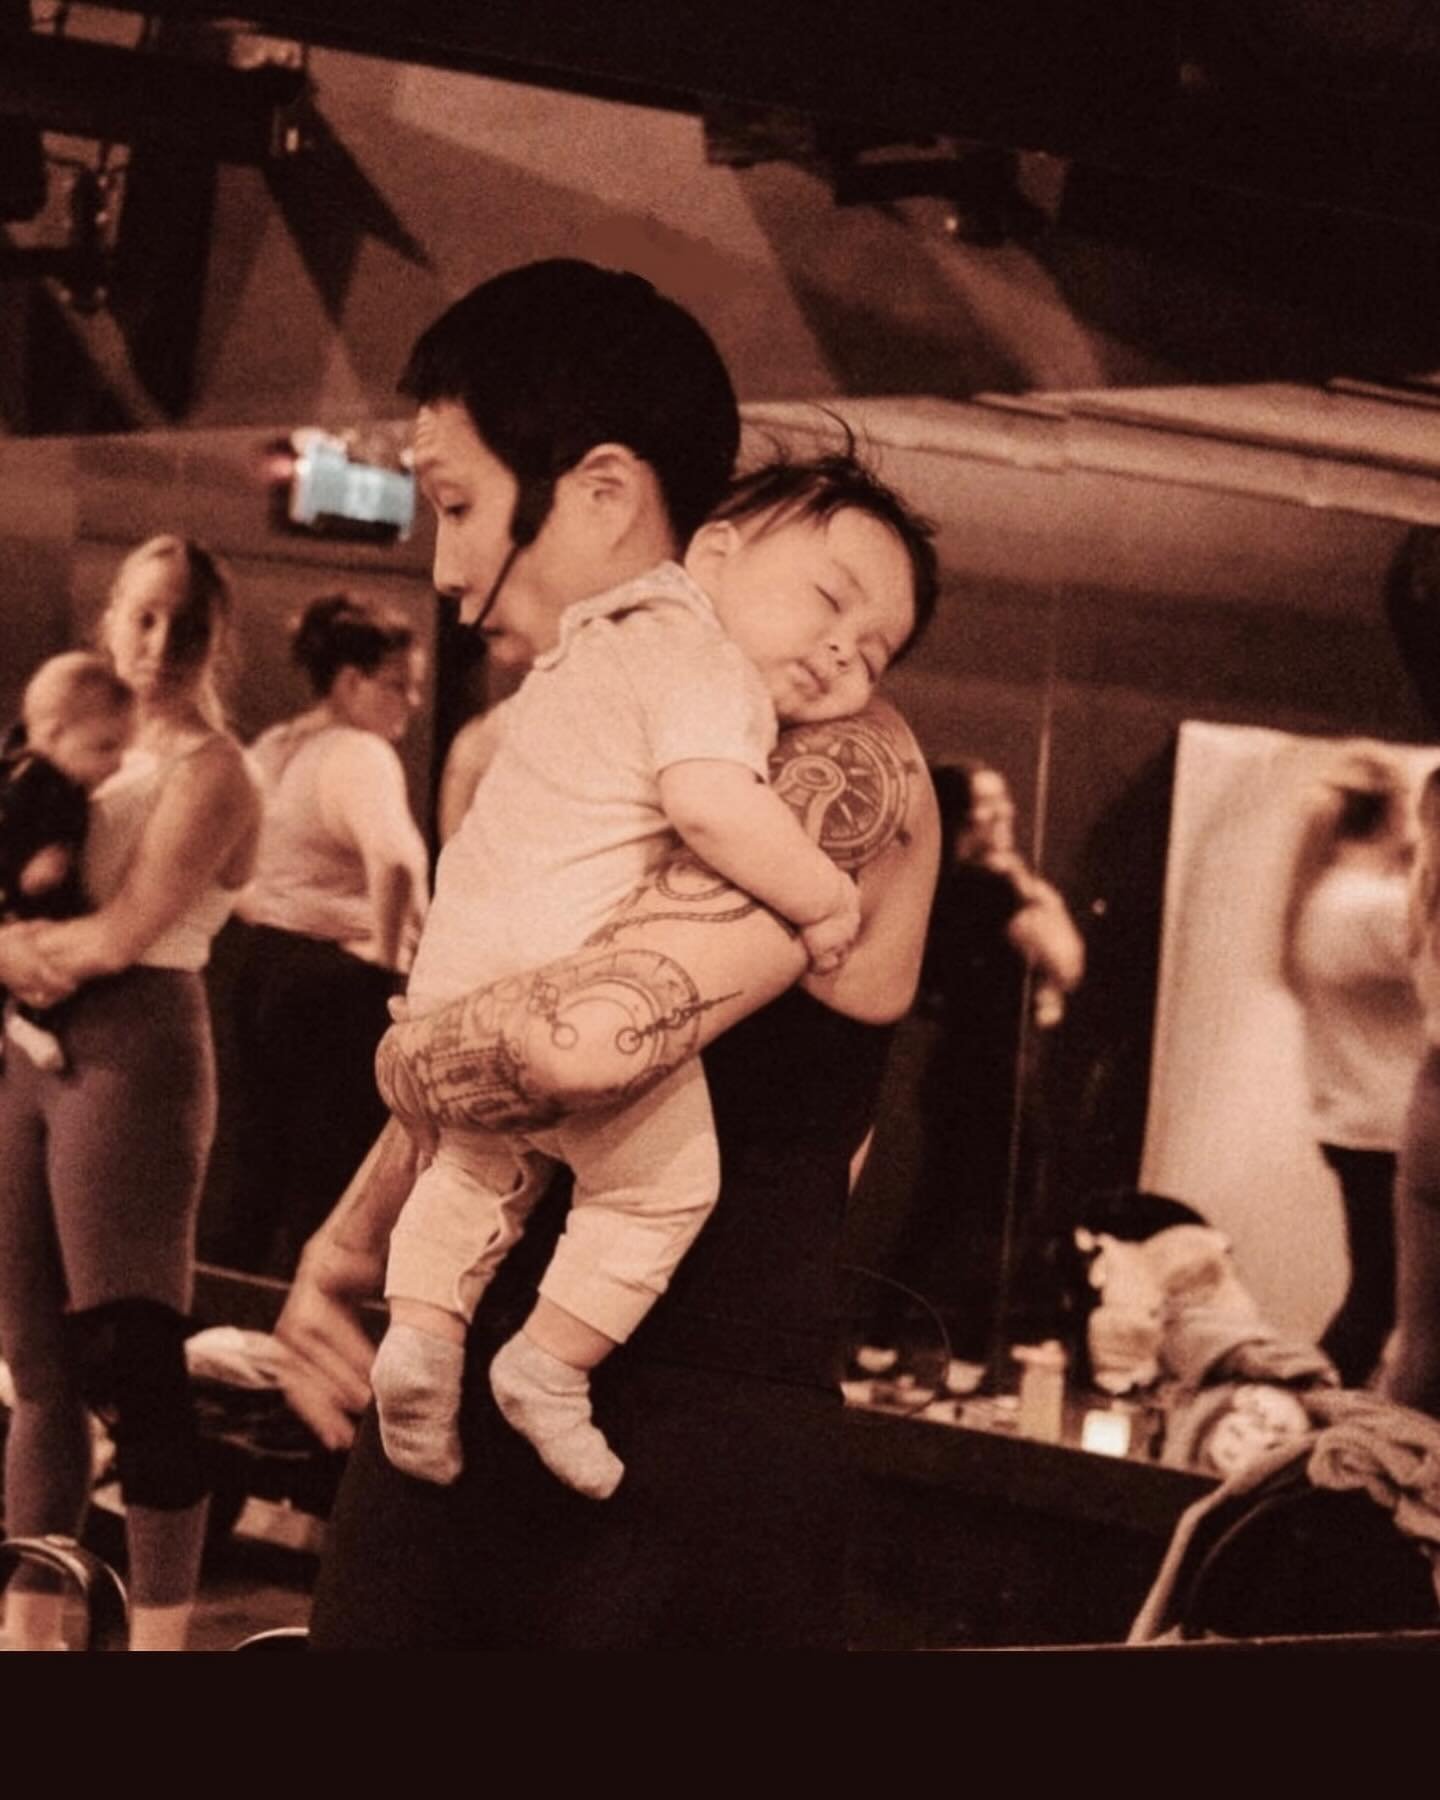 There&rsquo;s a time during each CARE class where I have mamas hold their little ones and dance to the beat of the music together. This is the part in class when Keanu usually falls asleep in my arms🥹.

My theory is that his connection to music star